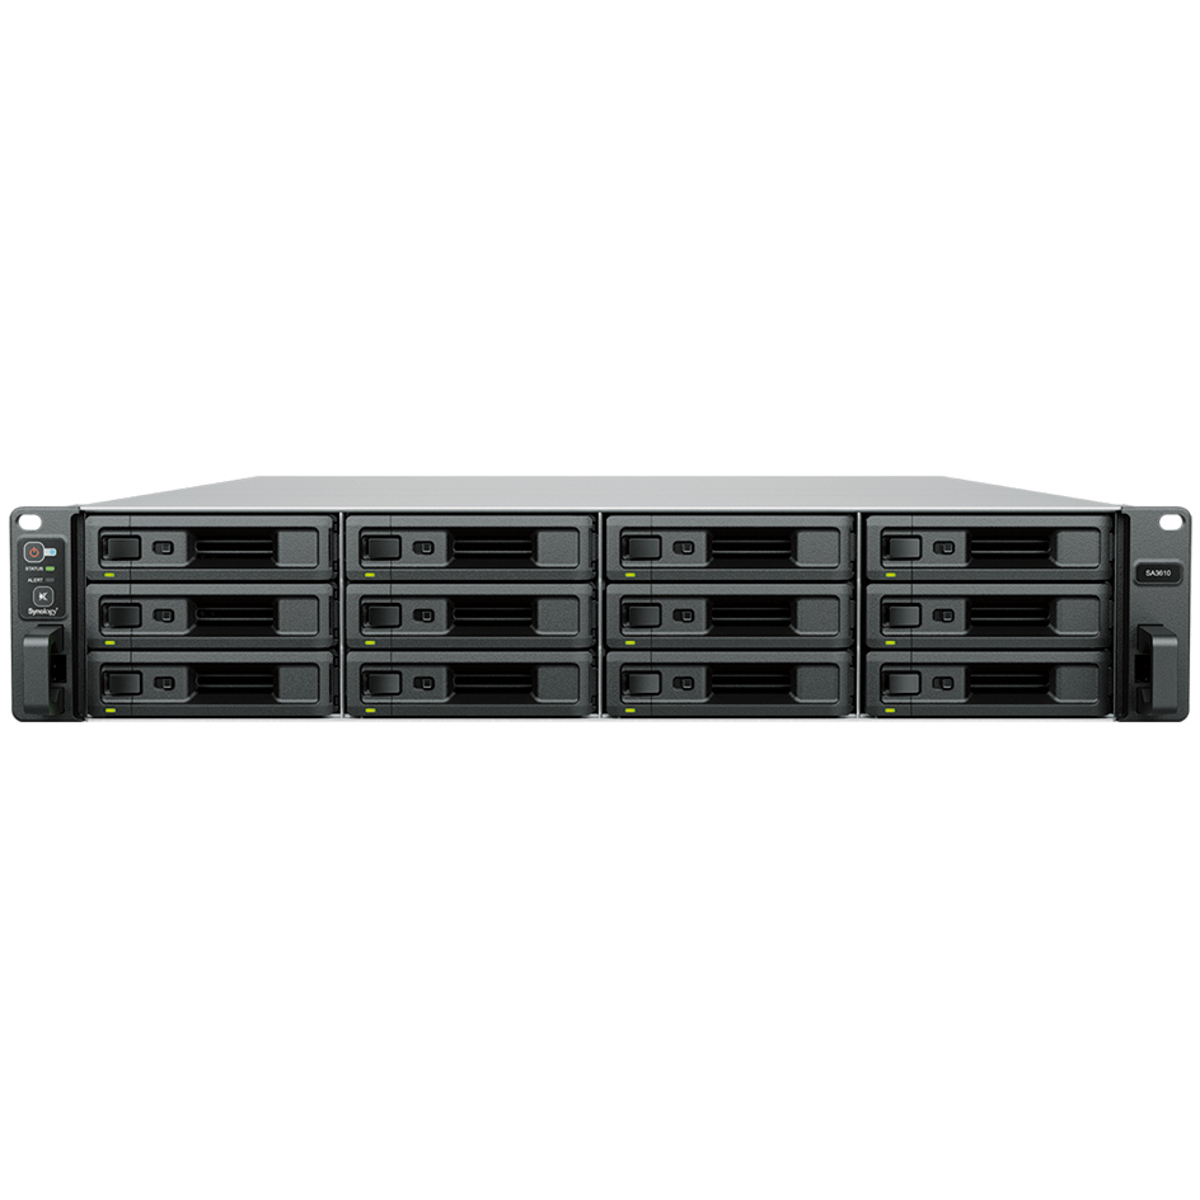 Synology RackStation SA3610 132tb 12-Bay RackMount Large Business / Enterprise NAS - Network Attached Storage Device 11x12tb Seagate IronWolf Pro ST12000NT001 3.5 7200rpm SATA 6Gb/s HDD NAS Class Drives Installed - Burn-In Tested - ON SALE RackStation SA3610